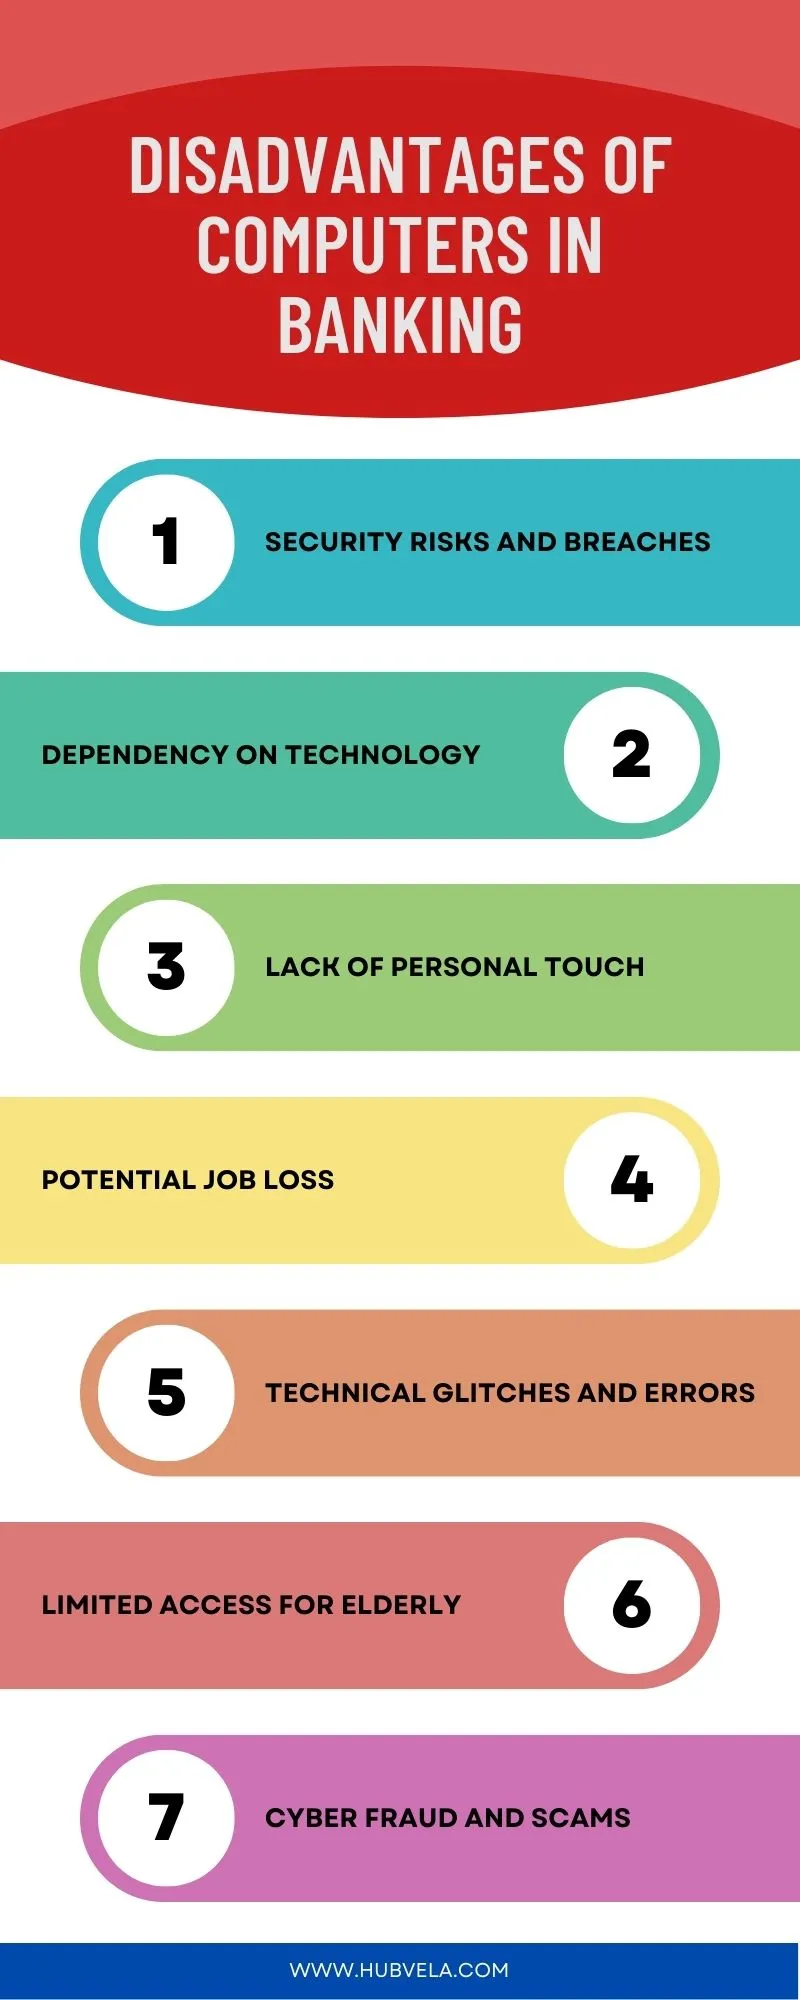 Disadvantages of Computers in Banking Infographic